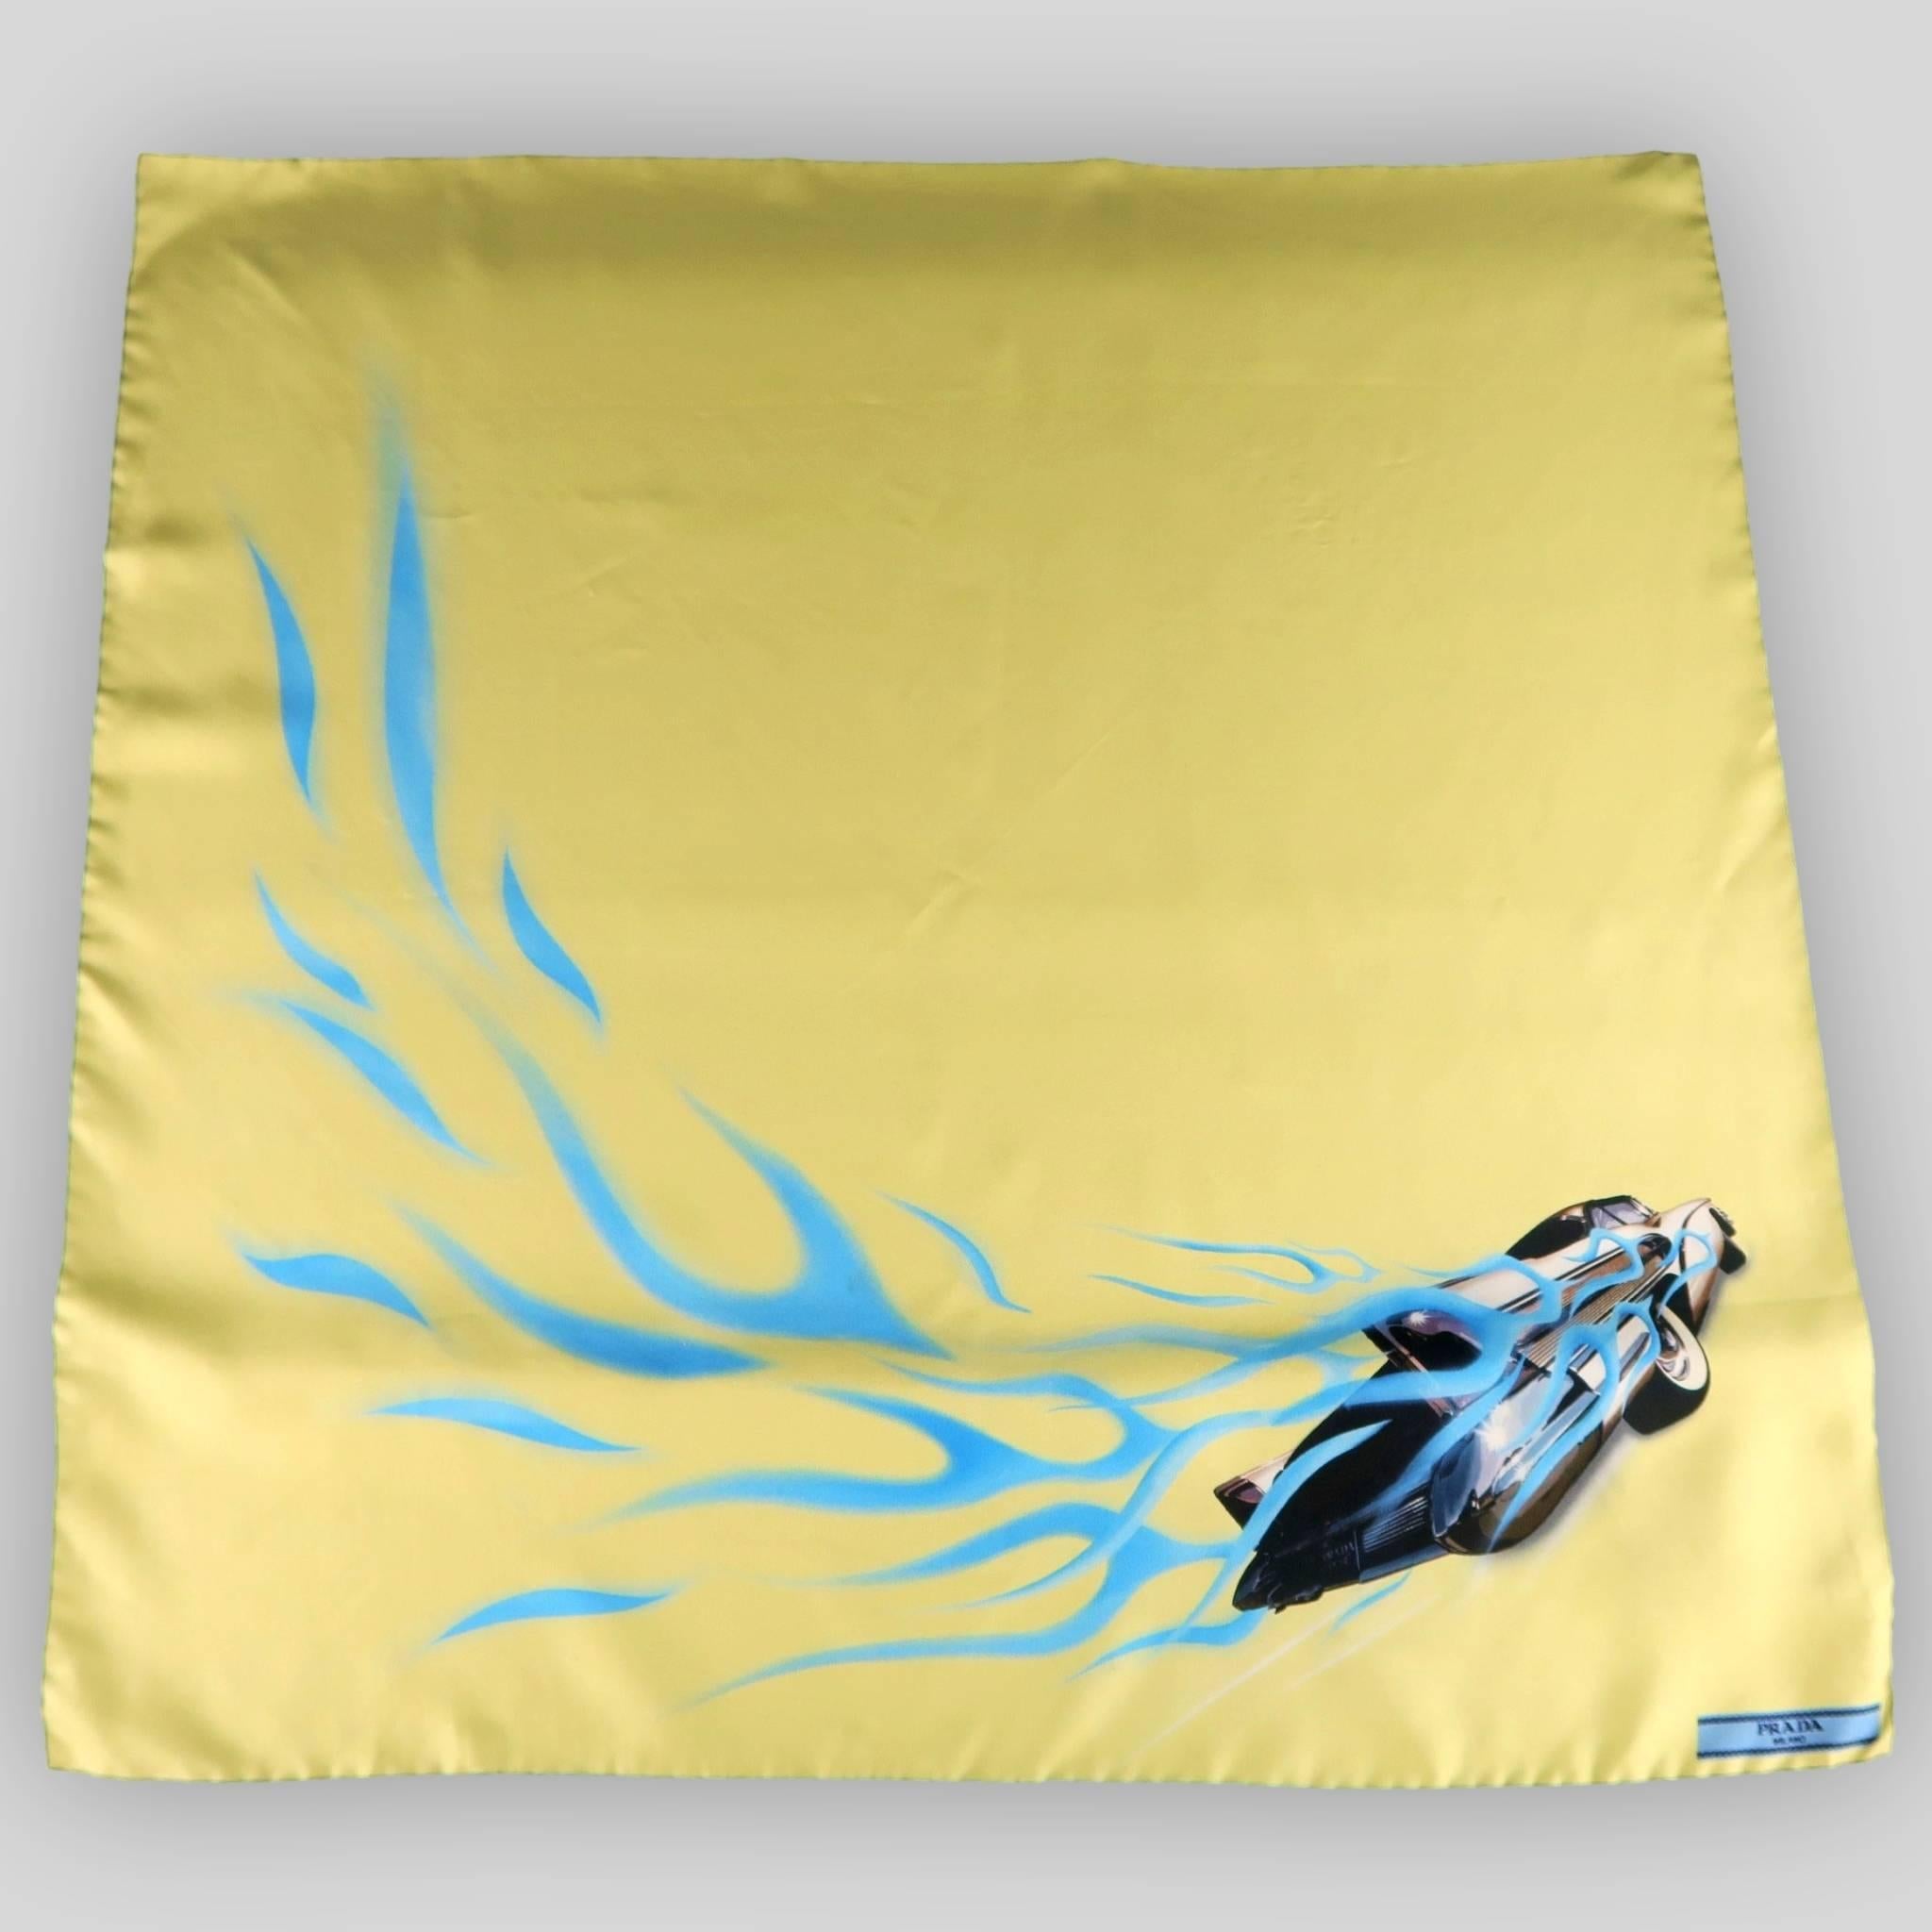 PRADA scarf comes in light yellow silk twill and features Spring 2015 blue car and flame graphic print and black piping. Minor wear. with box. Made in Italy.
 
Good Pre-Owned Condition.
 
23 x 23 in.


SKU: 85370